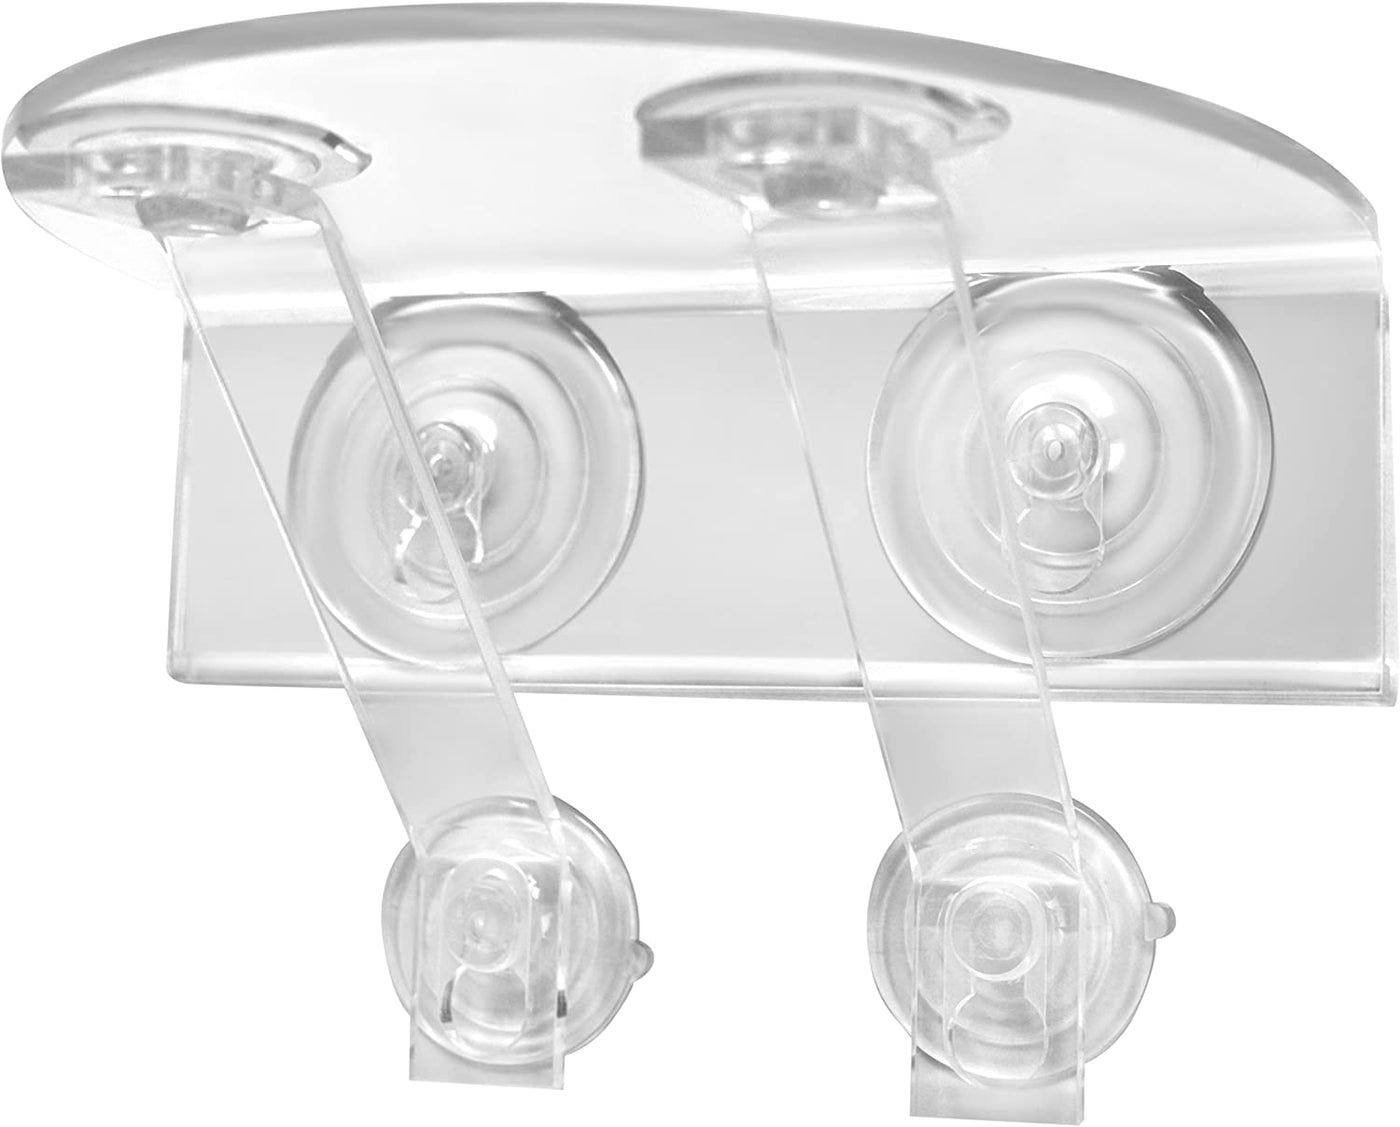 Suction Cup Window Shelf - Strong Support for 2.0 lbs.